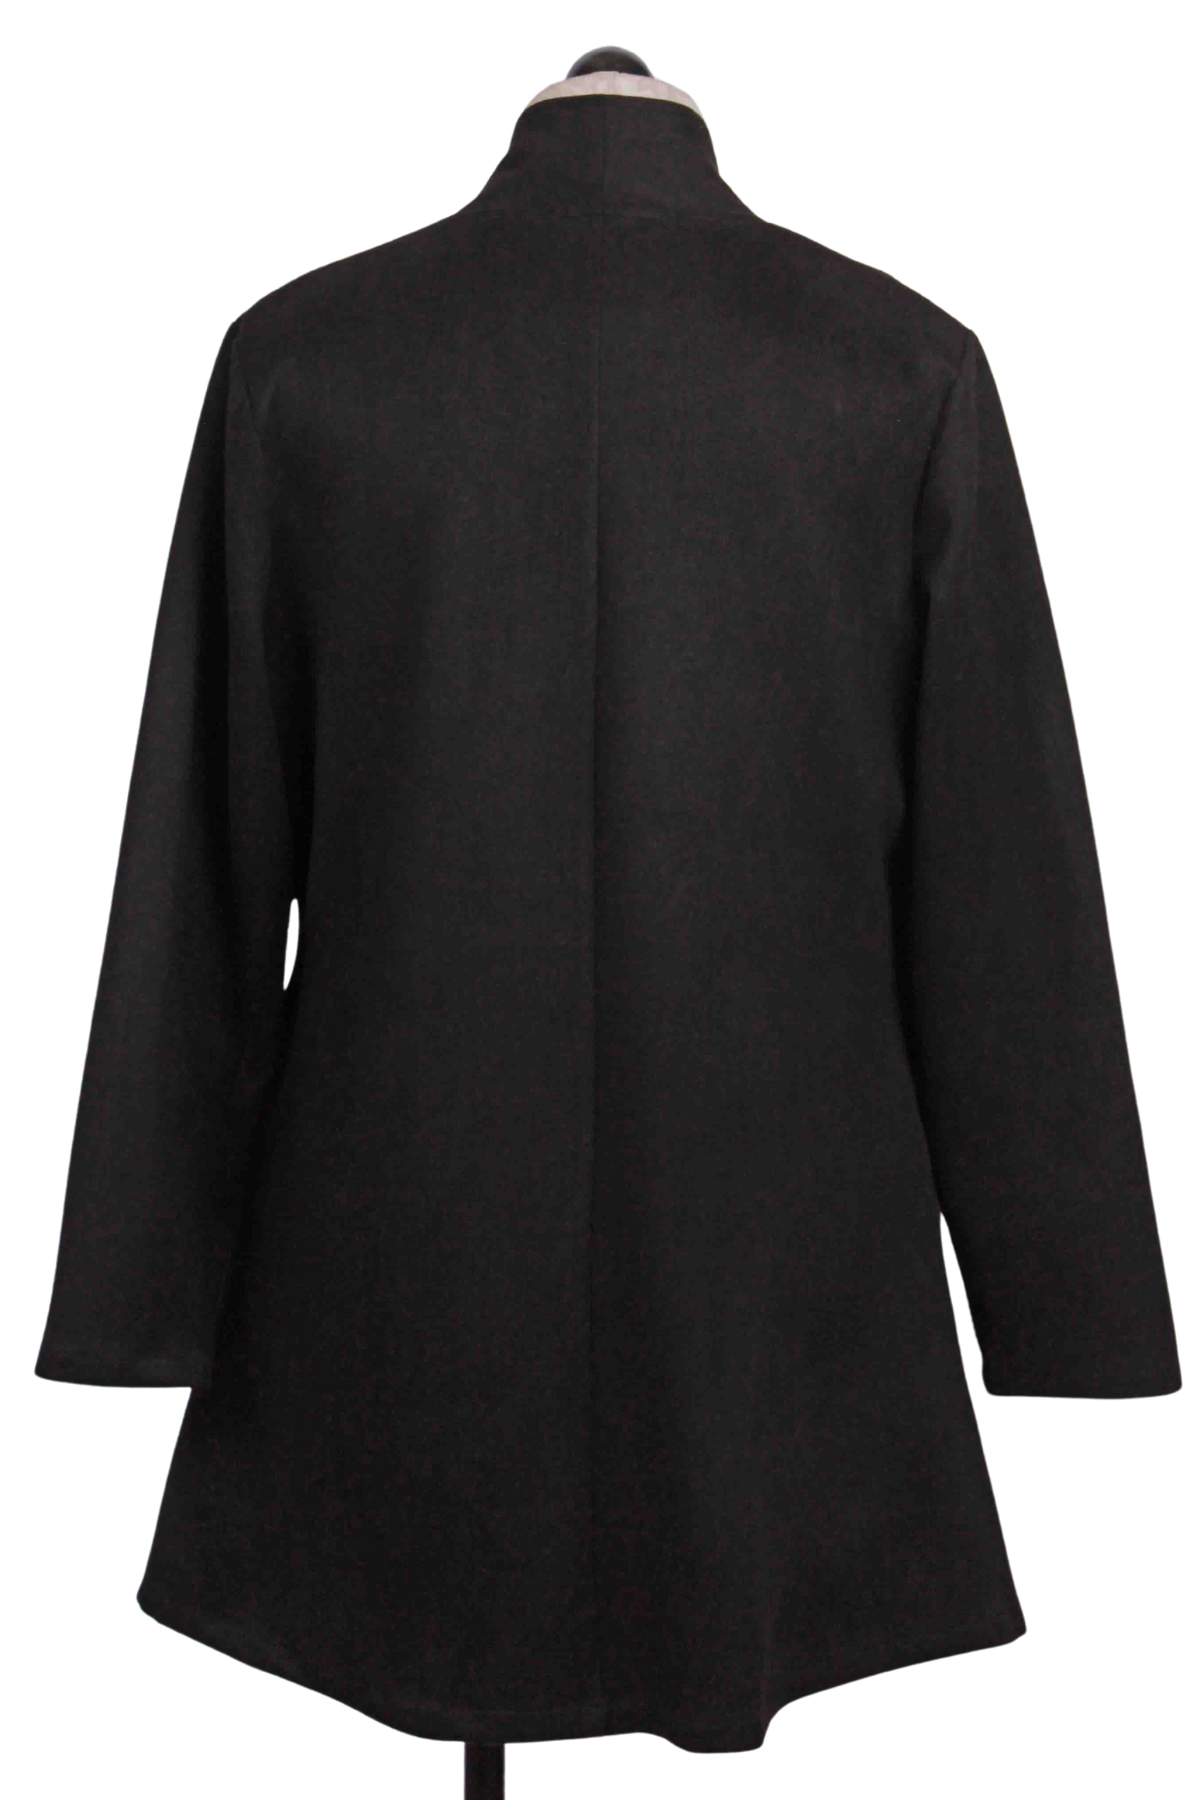 back view of Black Open Front Faux Suede Jacket with Grommets by Radzoli